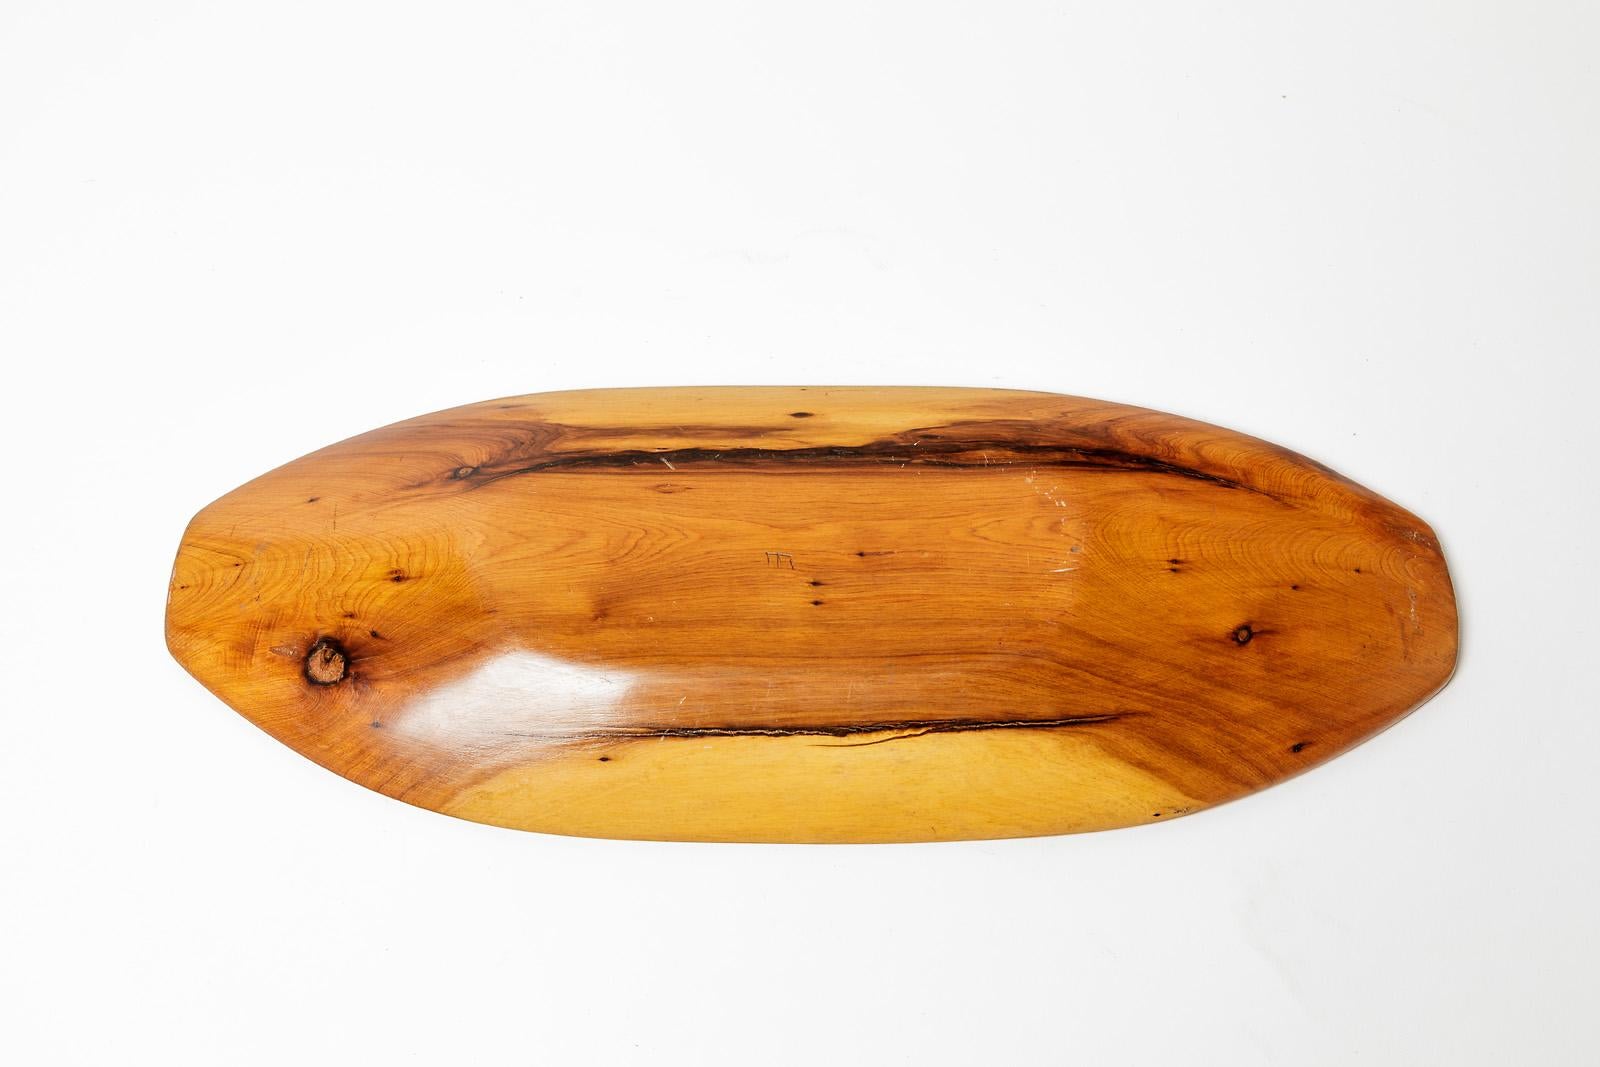 Olive Wood Sculptural Plate or Dish circa 1950 French Design Bowl For Sale 1